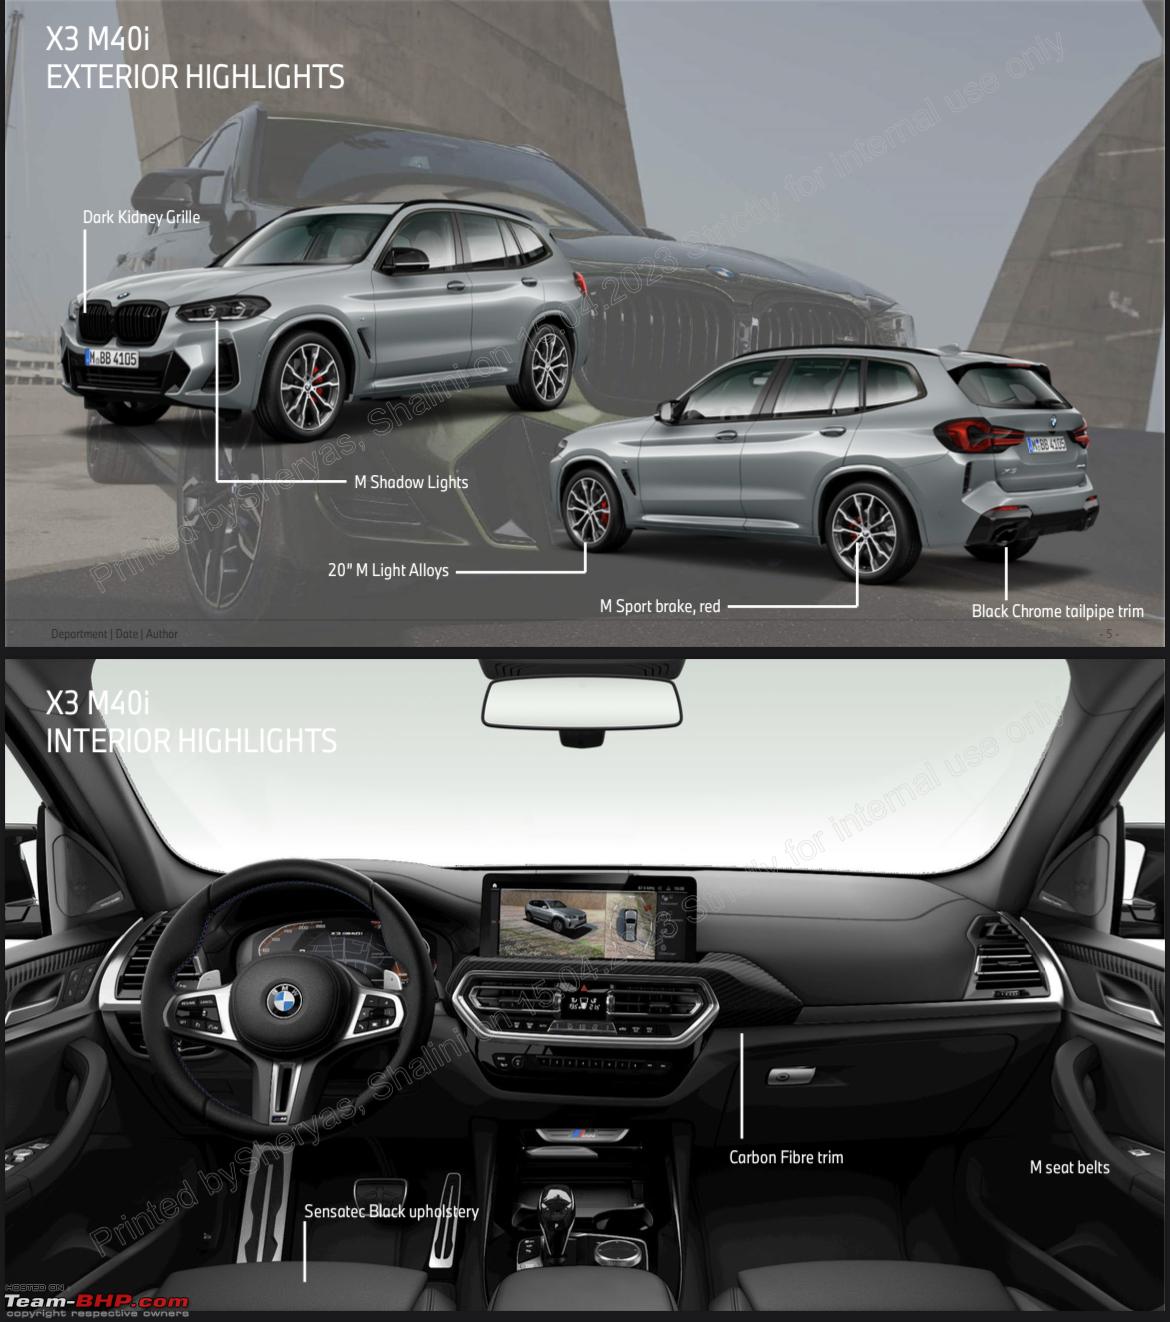 BMW X3 M40i coming soon to India - Team-BHP